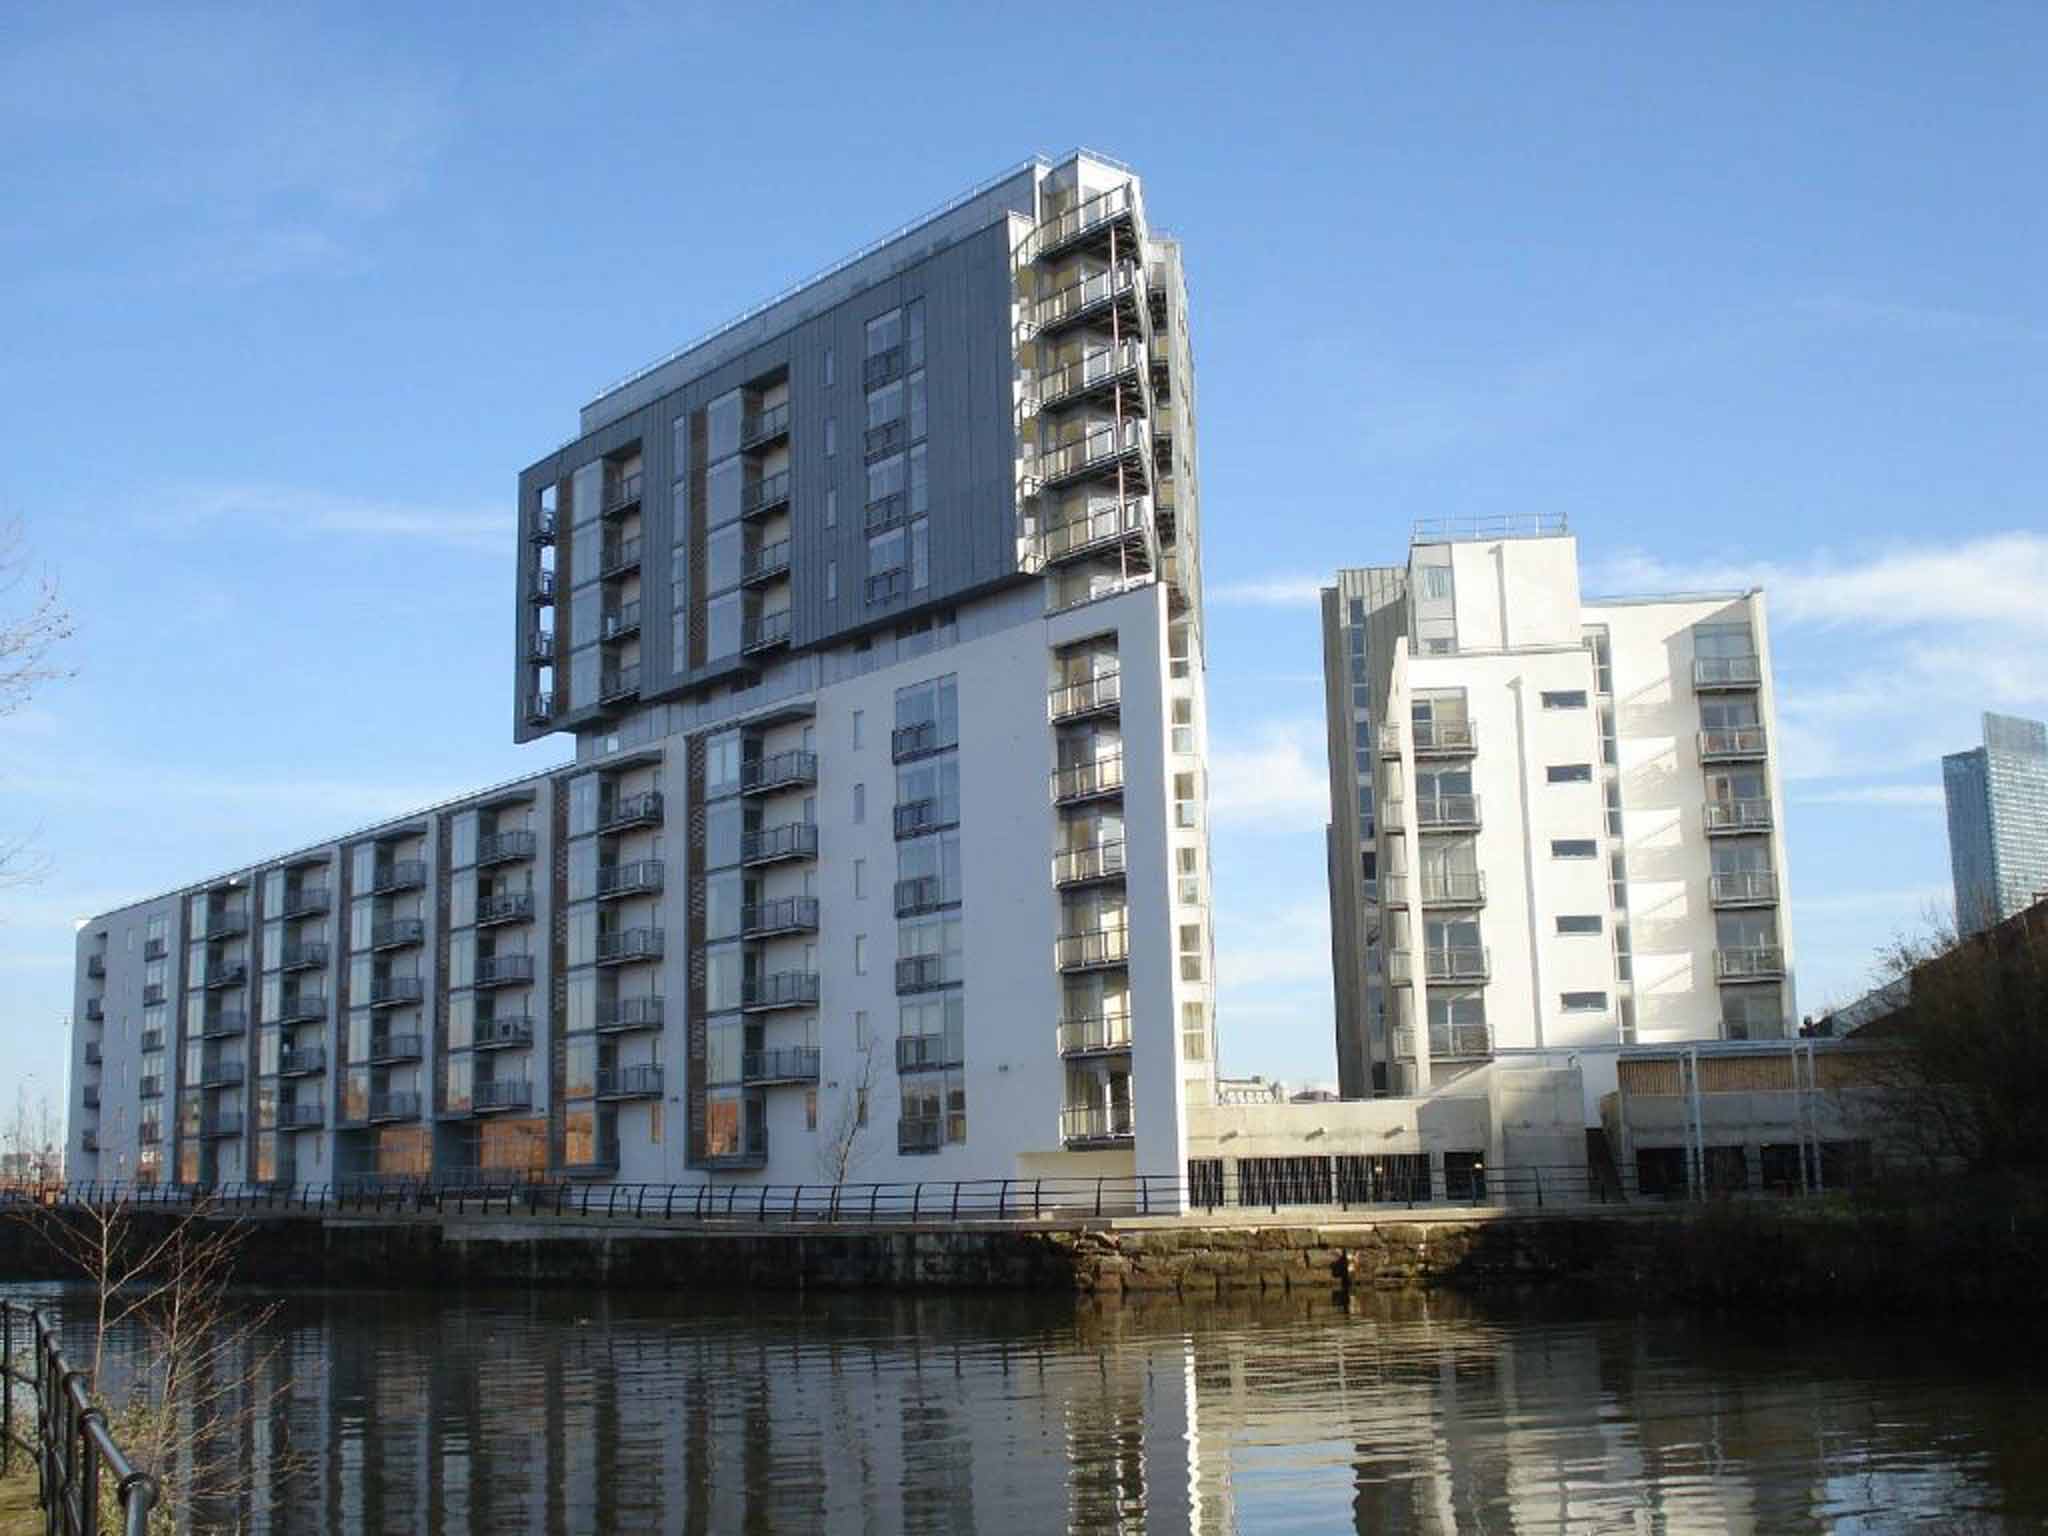 Two bedroom flat for sale, Vie Development, Salford, Manchester M3. On with Jordan Fishwick at £137,500.